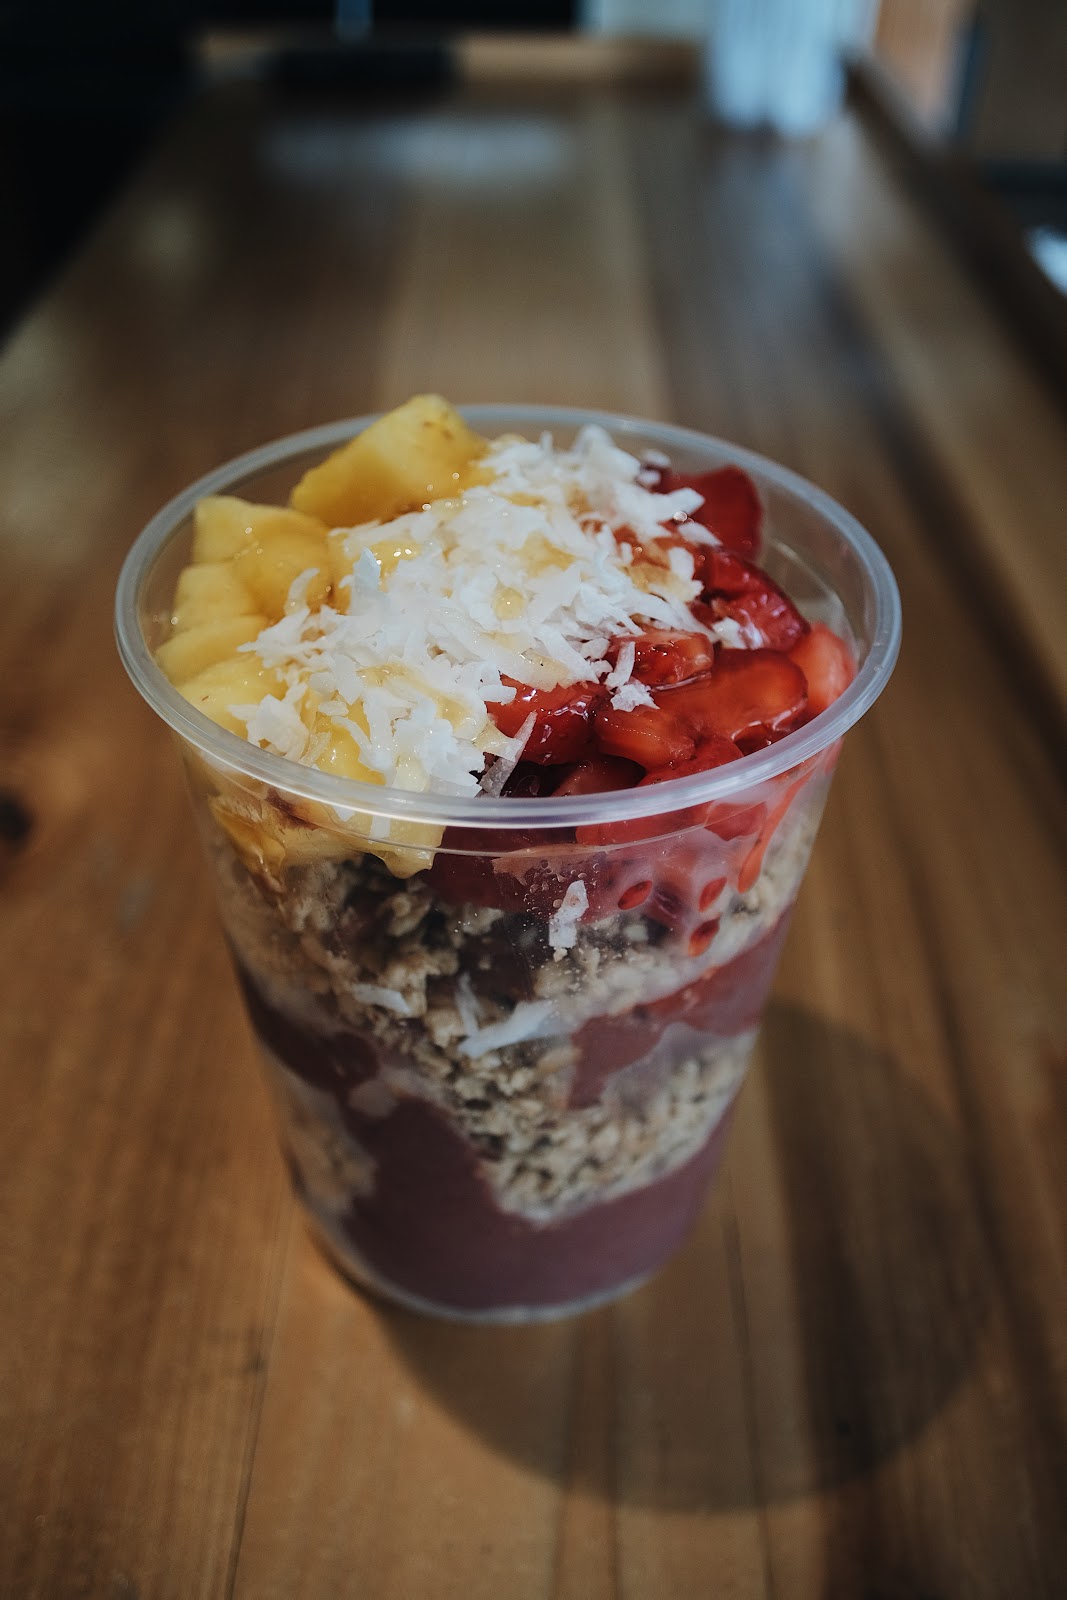 A photo of an açaí bowl topped with fruit and coconut shavings